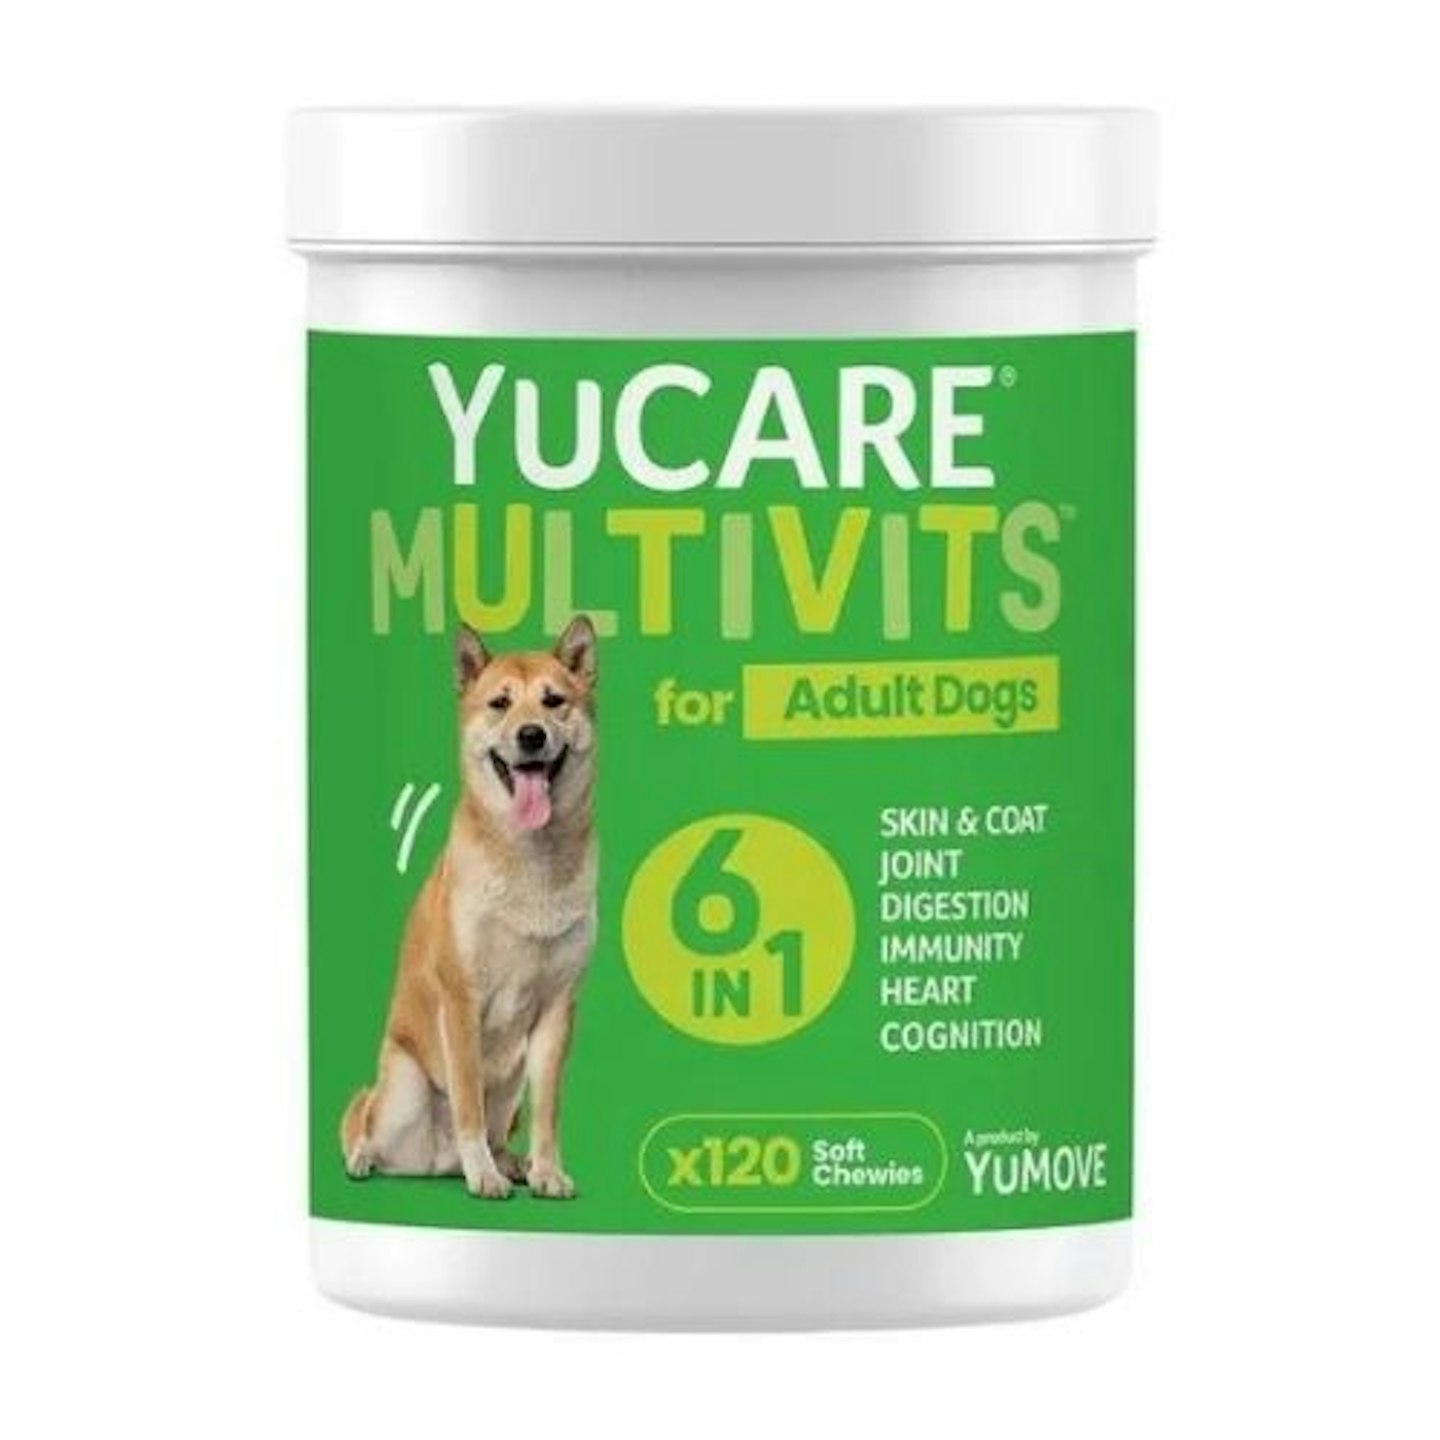 YuCARE MultiVits for Adult Dogs